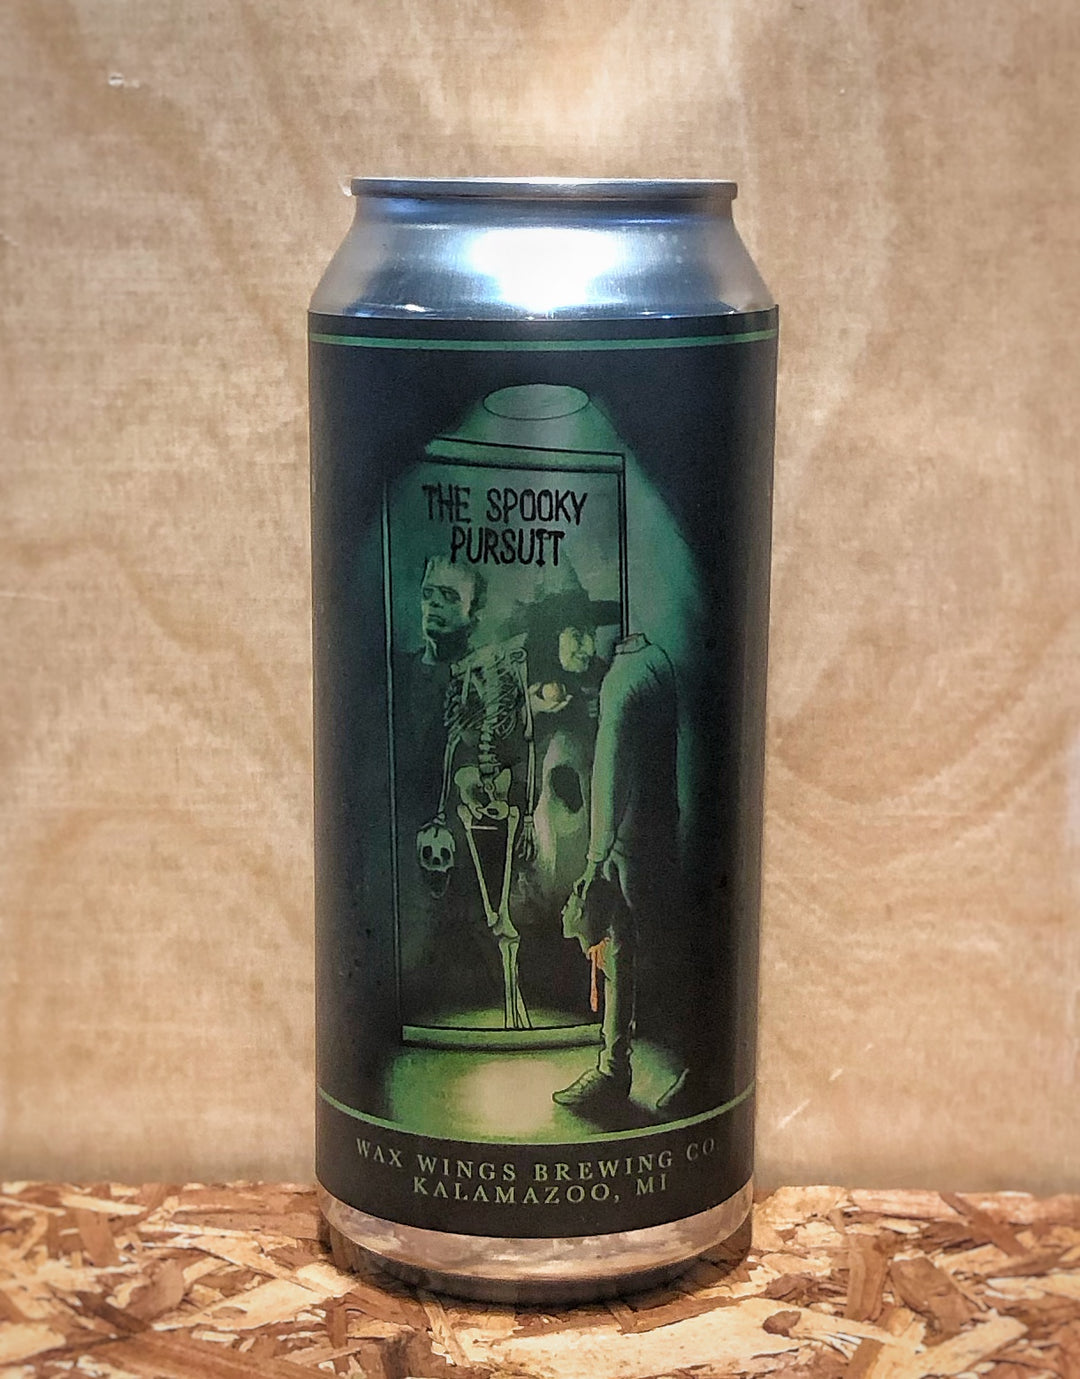 Wax Wings Brewing Co. 'The Spooky Pursuit' Double India Pale Ale (Kalamazoo, MI)